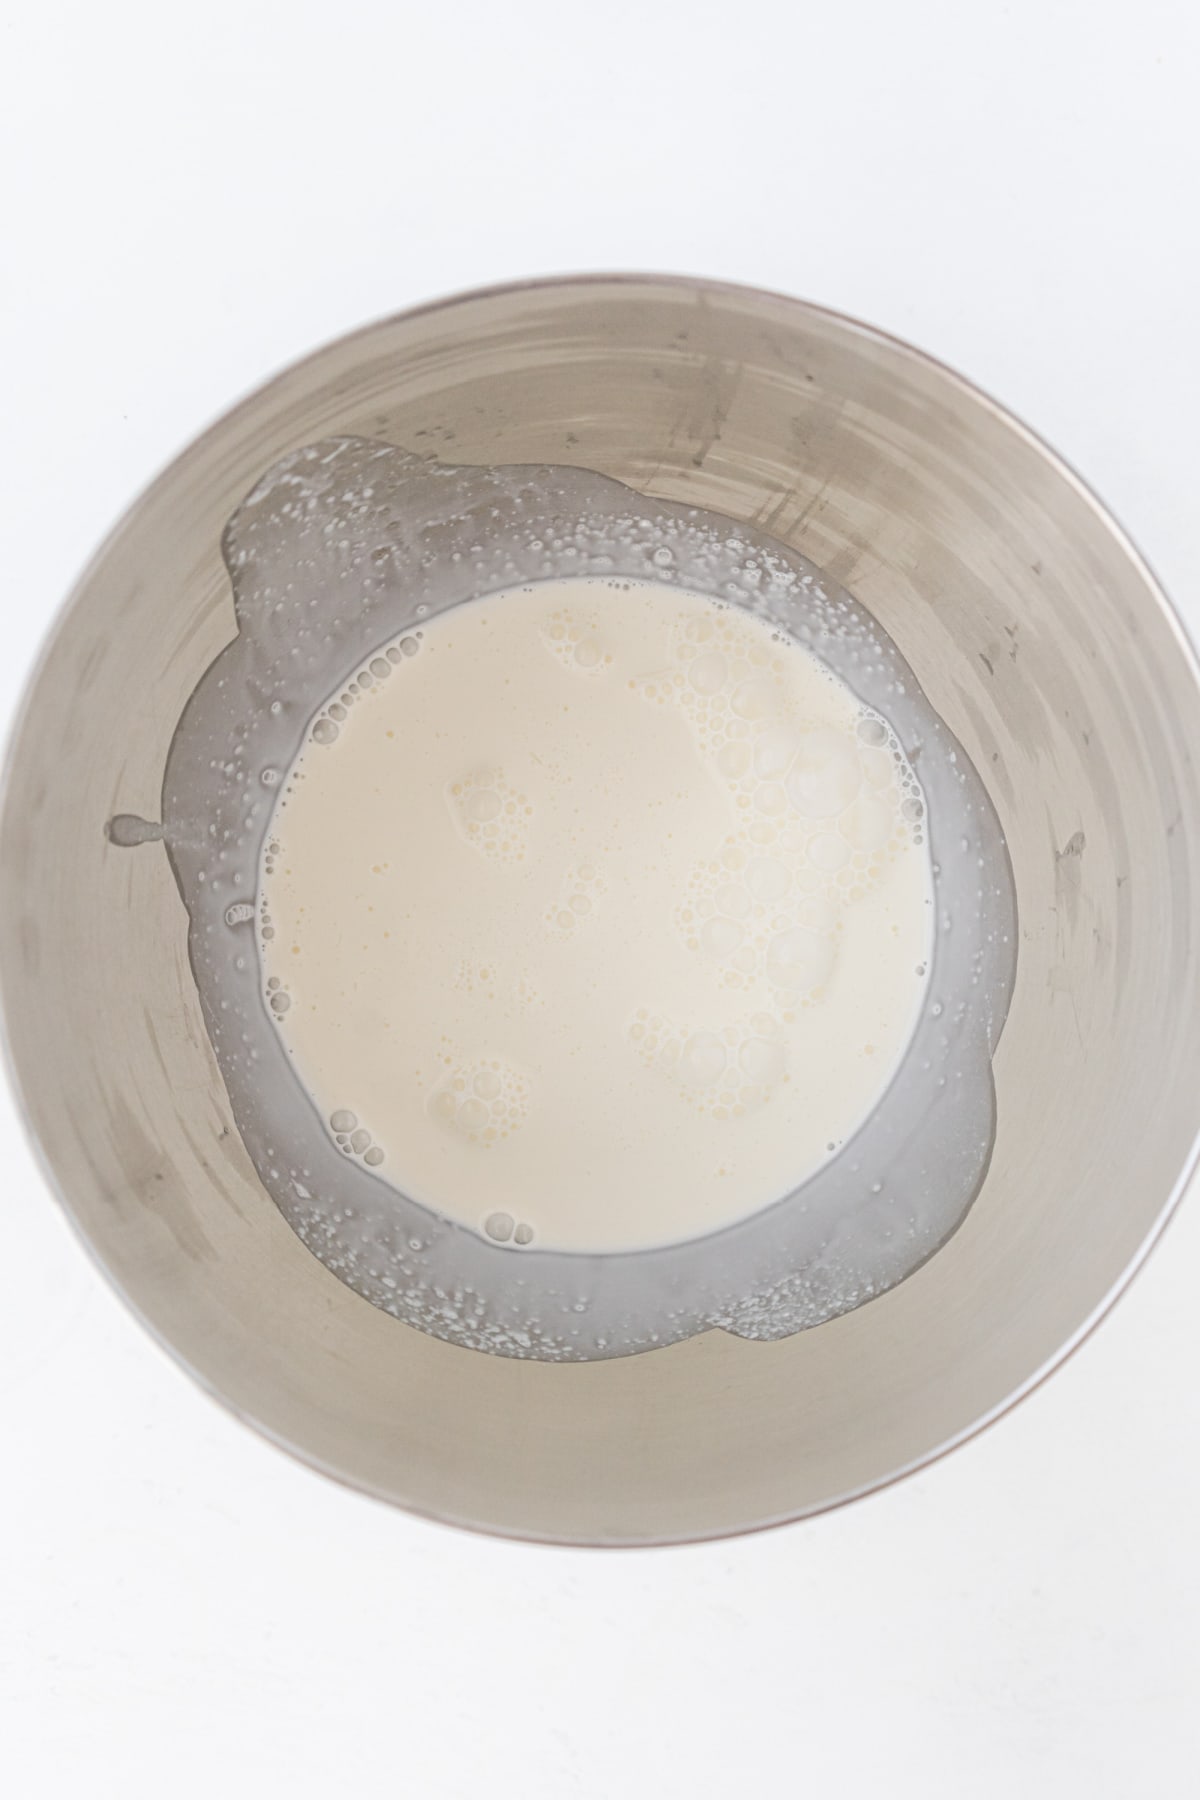 Heavy whipping cream in bowl